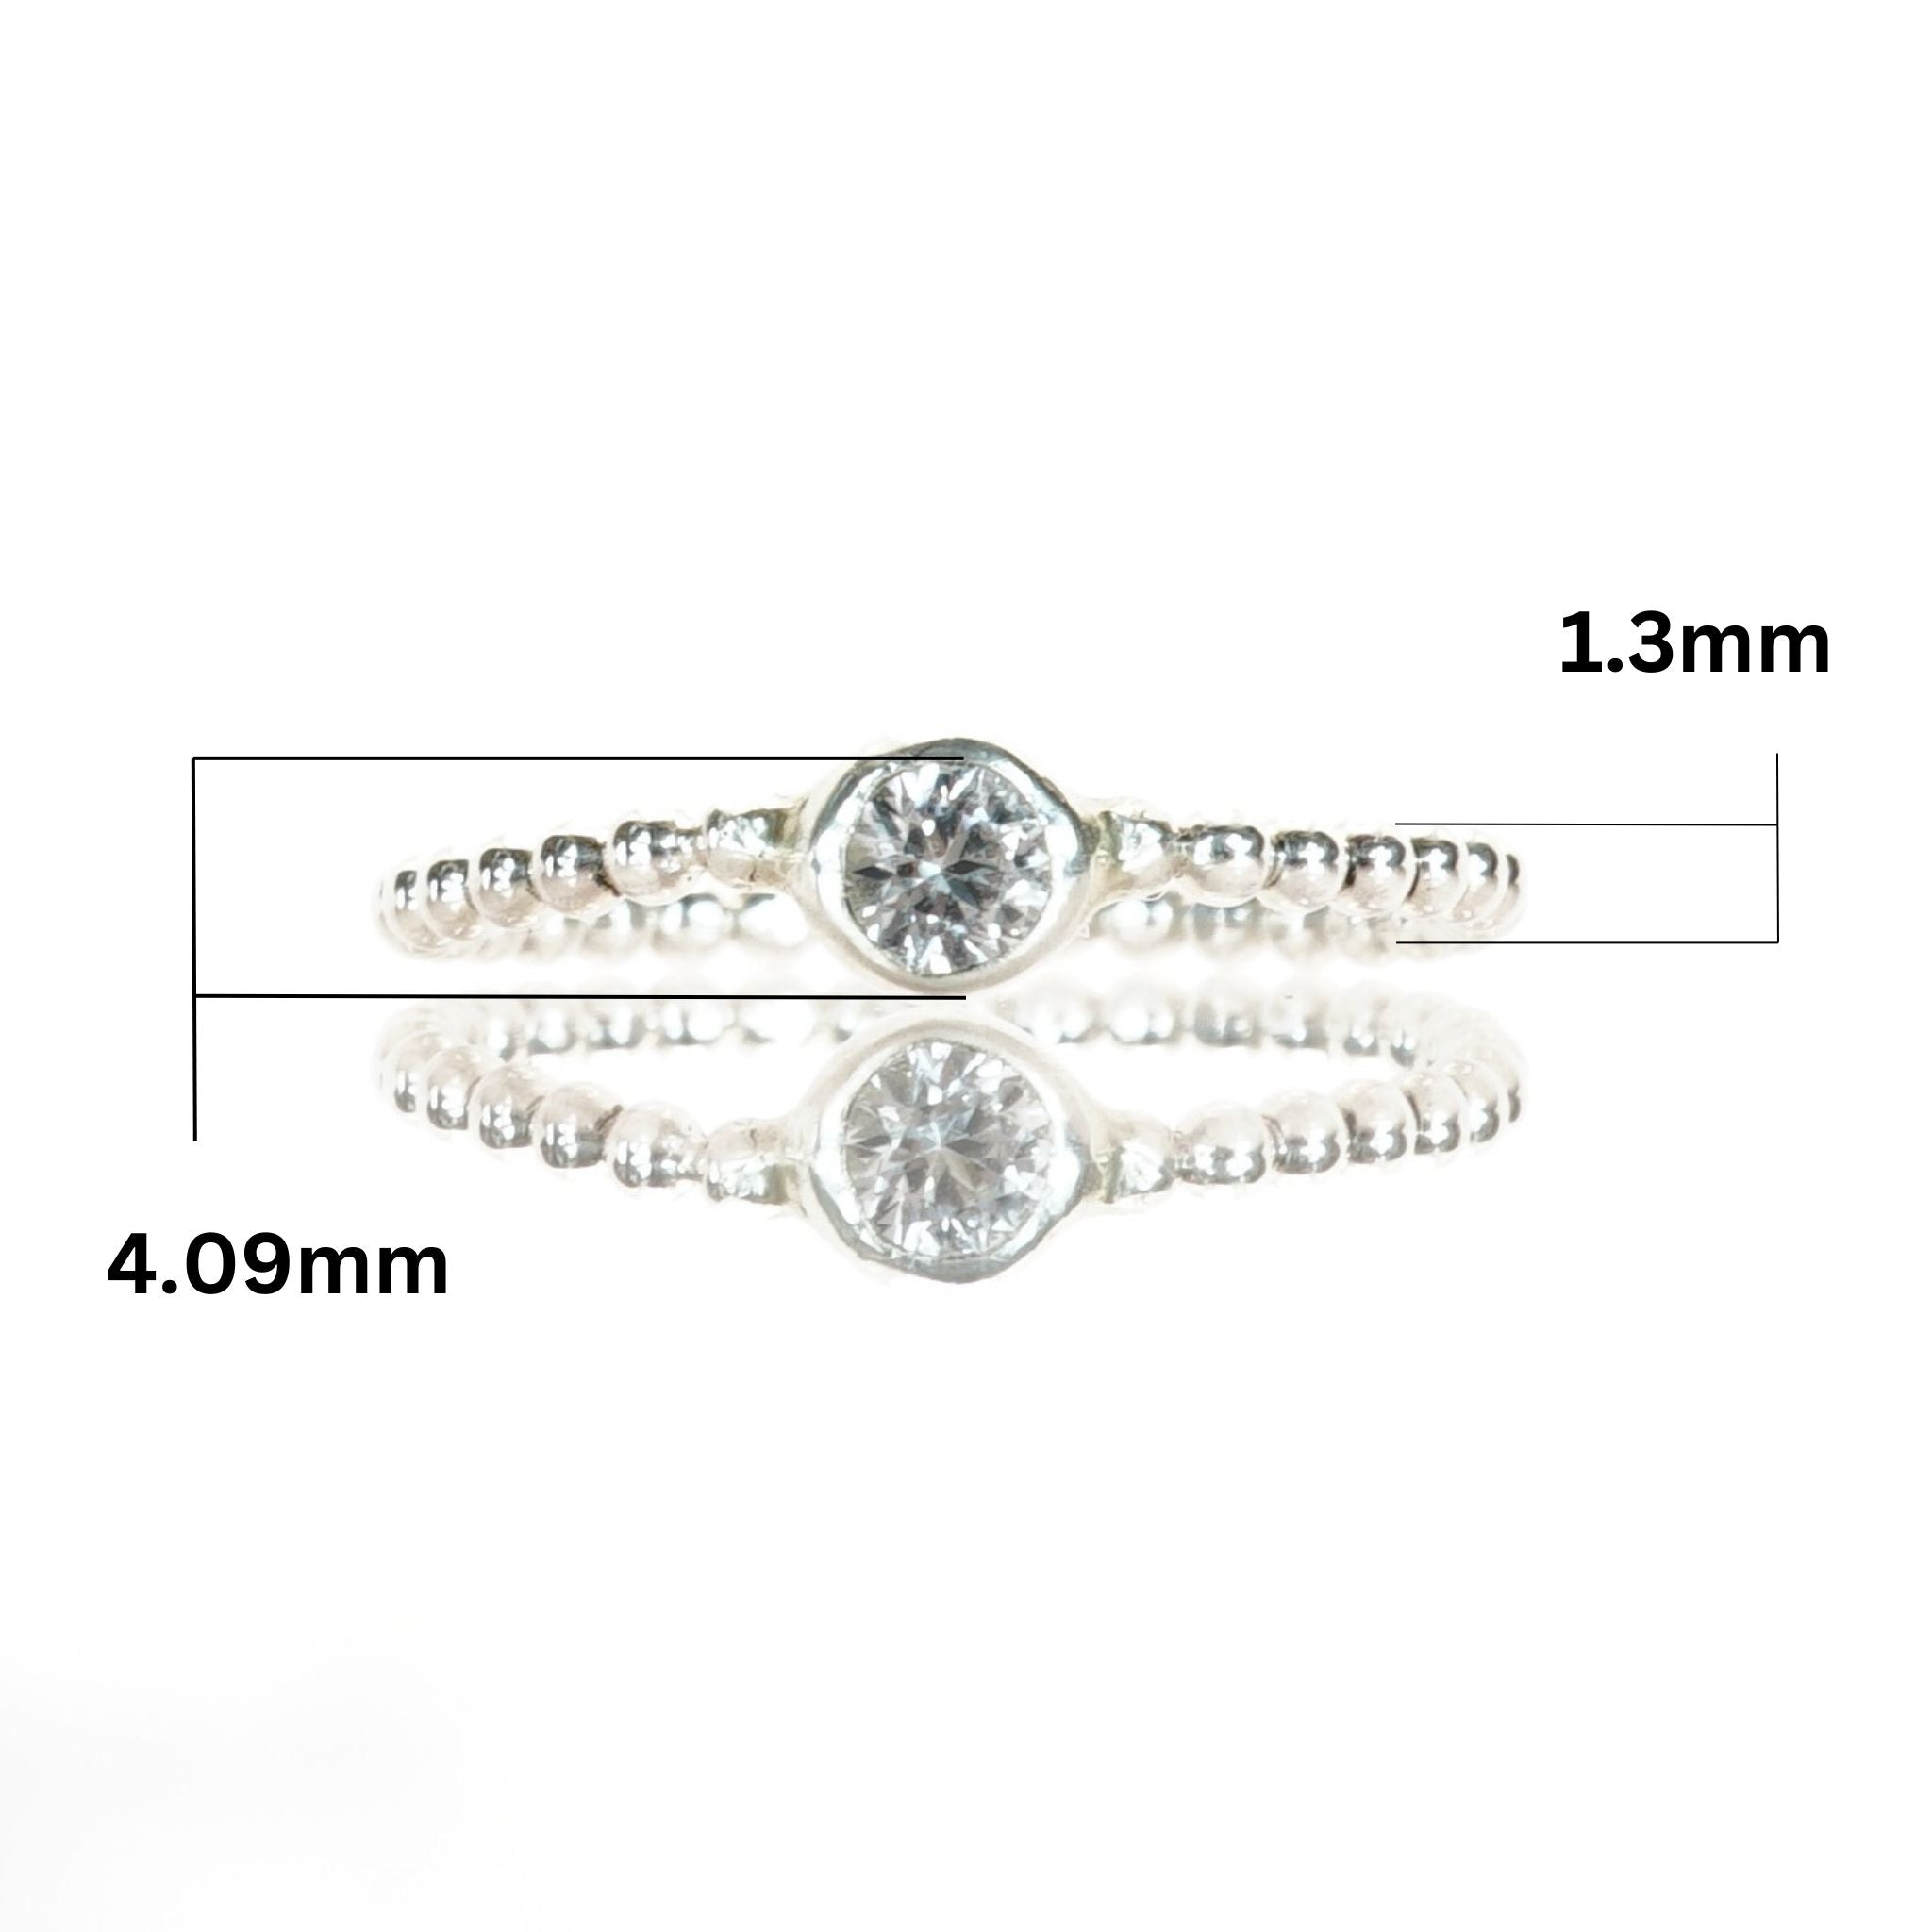 Beaded 3mm Silver Ring